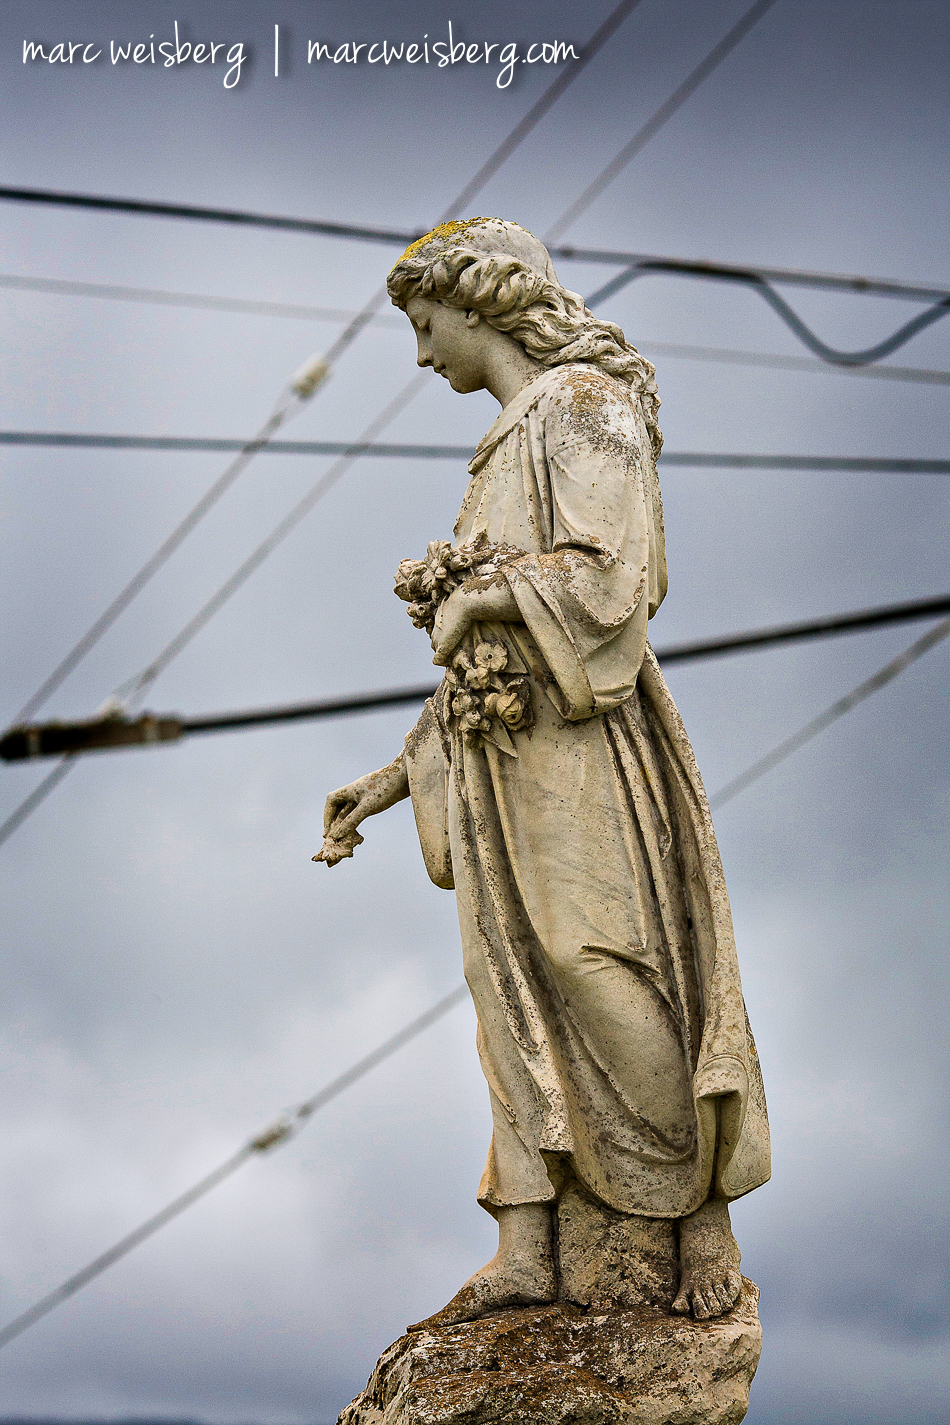 Part of an ongoing personal series on old graveyards. Guadalupe, Oceano, on the way to San Luis Obispo, California.